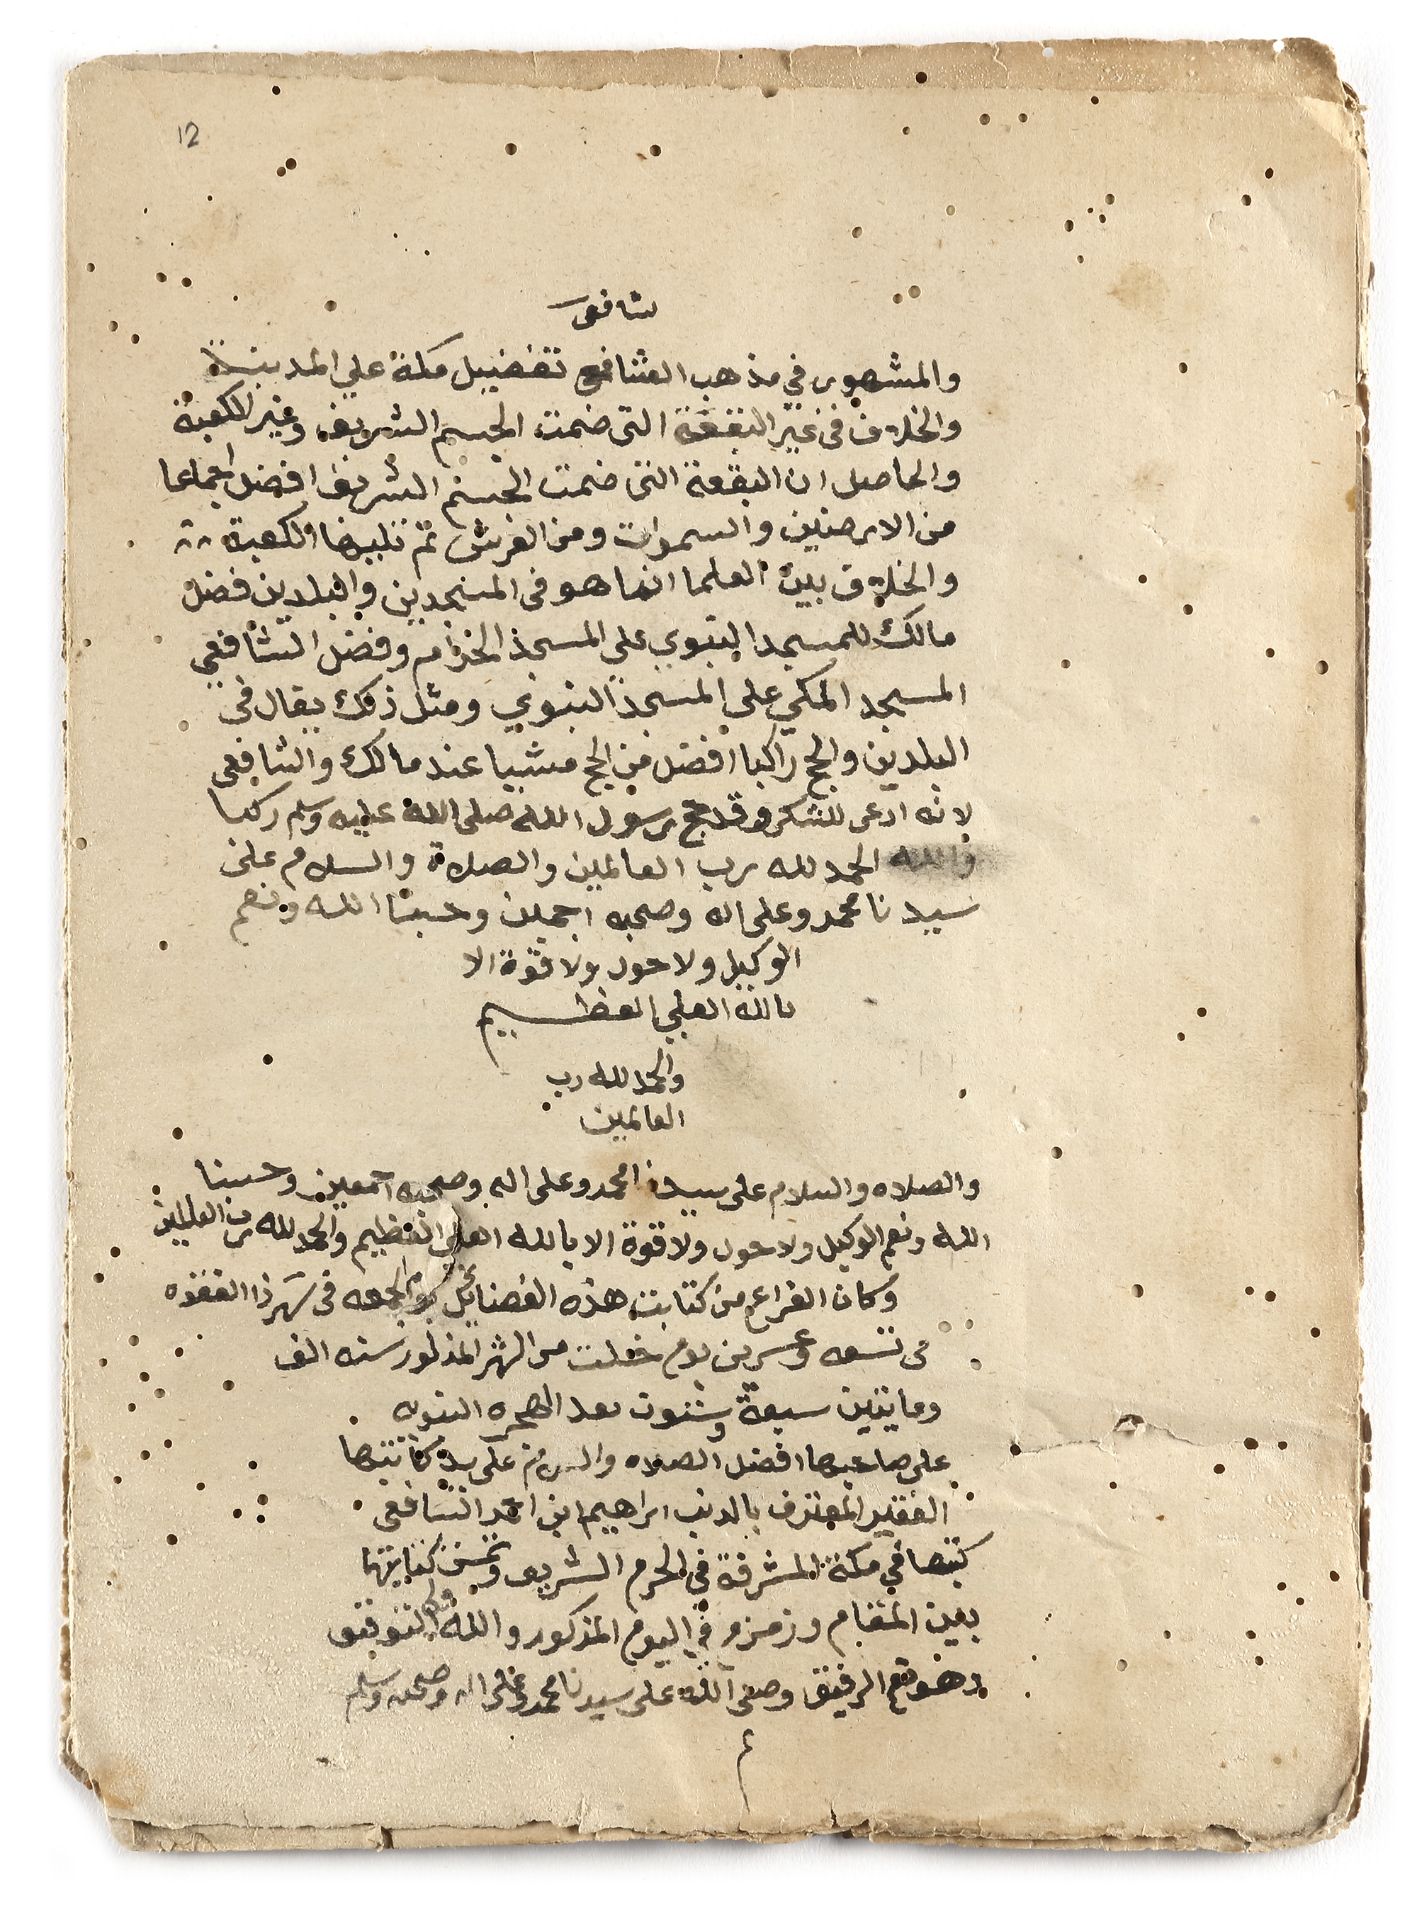 A CHAPTER ABOUT THE MERITS OF MECCA BY IBRAHIM IBN AHMED AL-SHAFI'I, IN MECCA AND DATED 1267 AH/1850 - Image 4 of 4